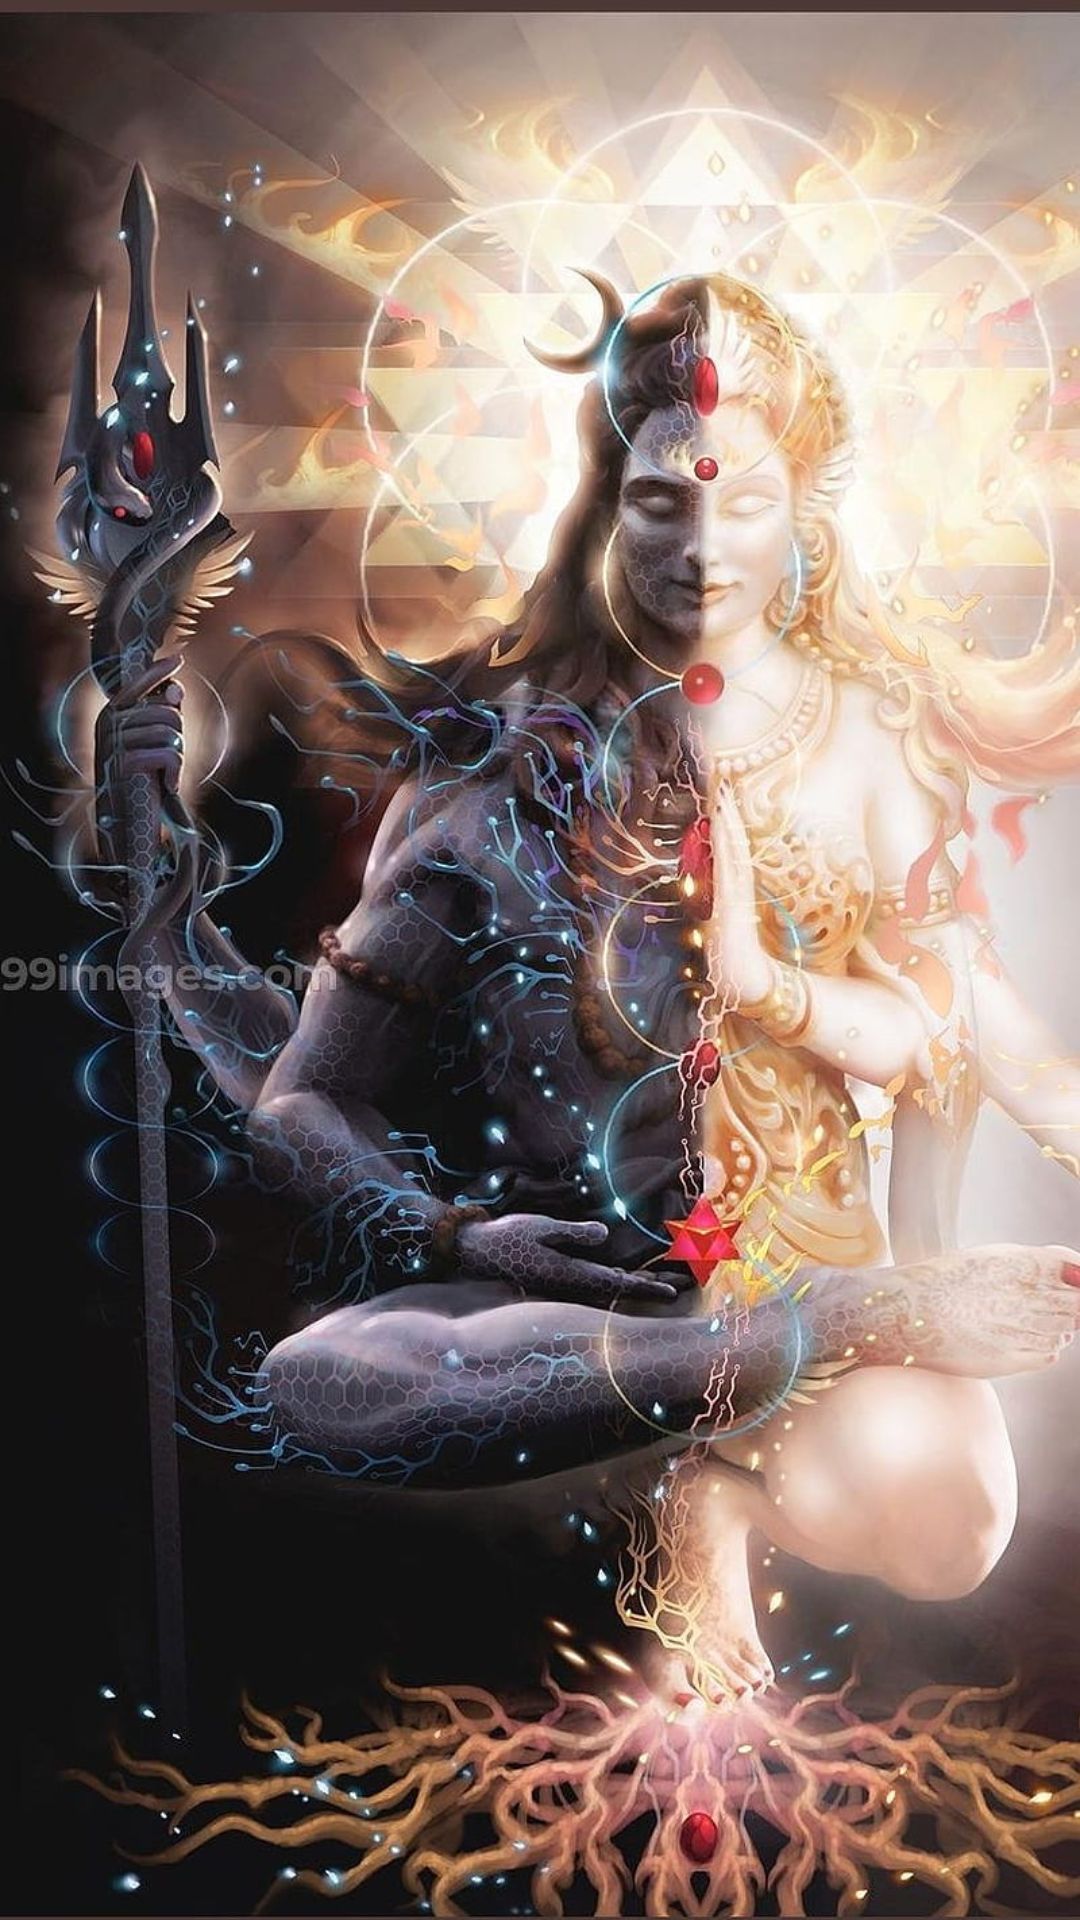 Lord shiva Wallpapers - Top 30 Best Lord shiva Wallpapers Download